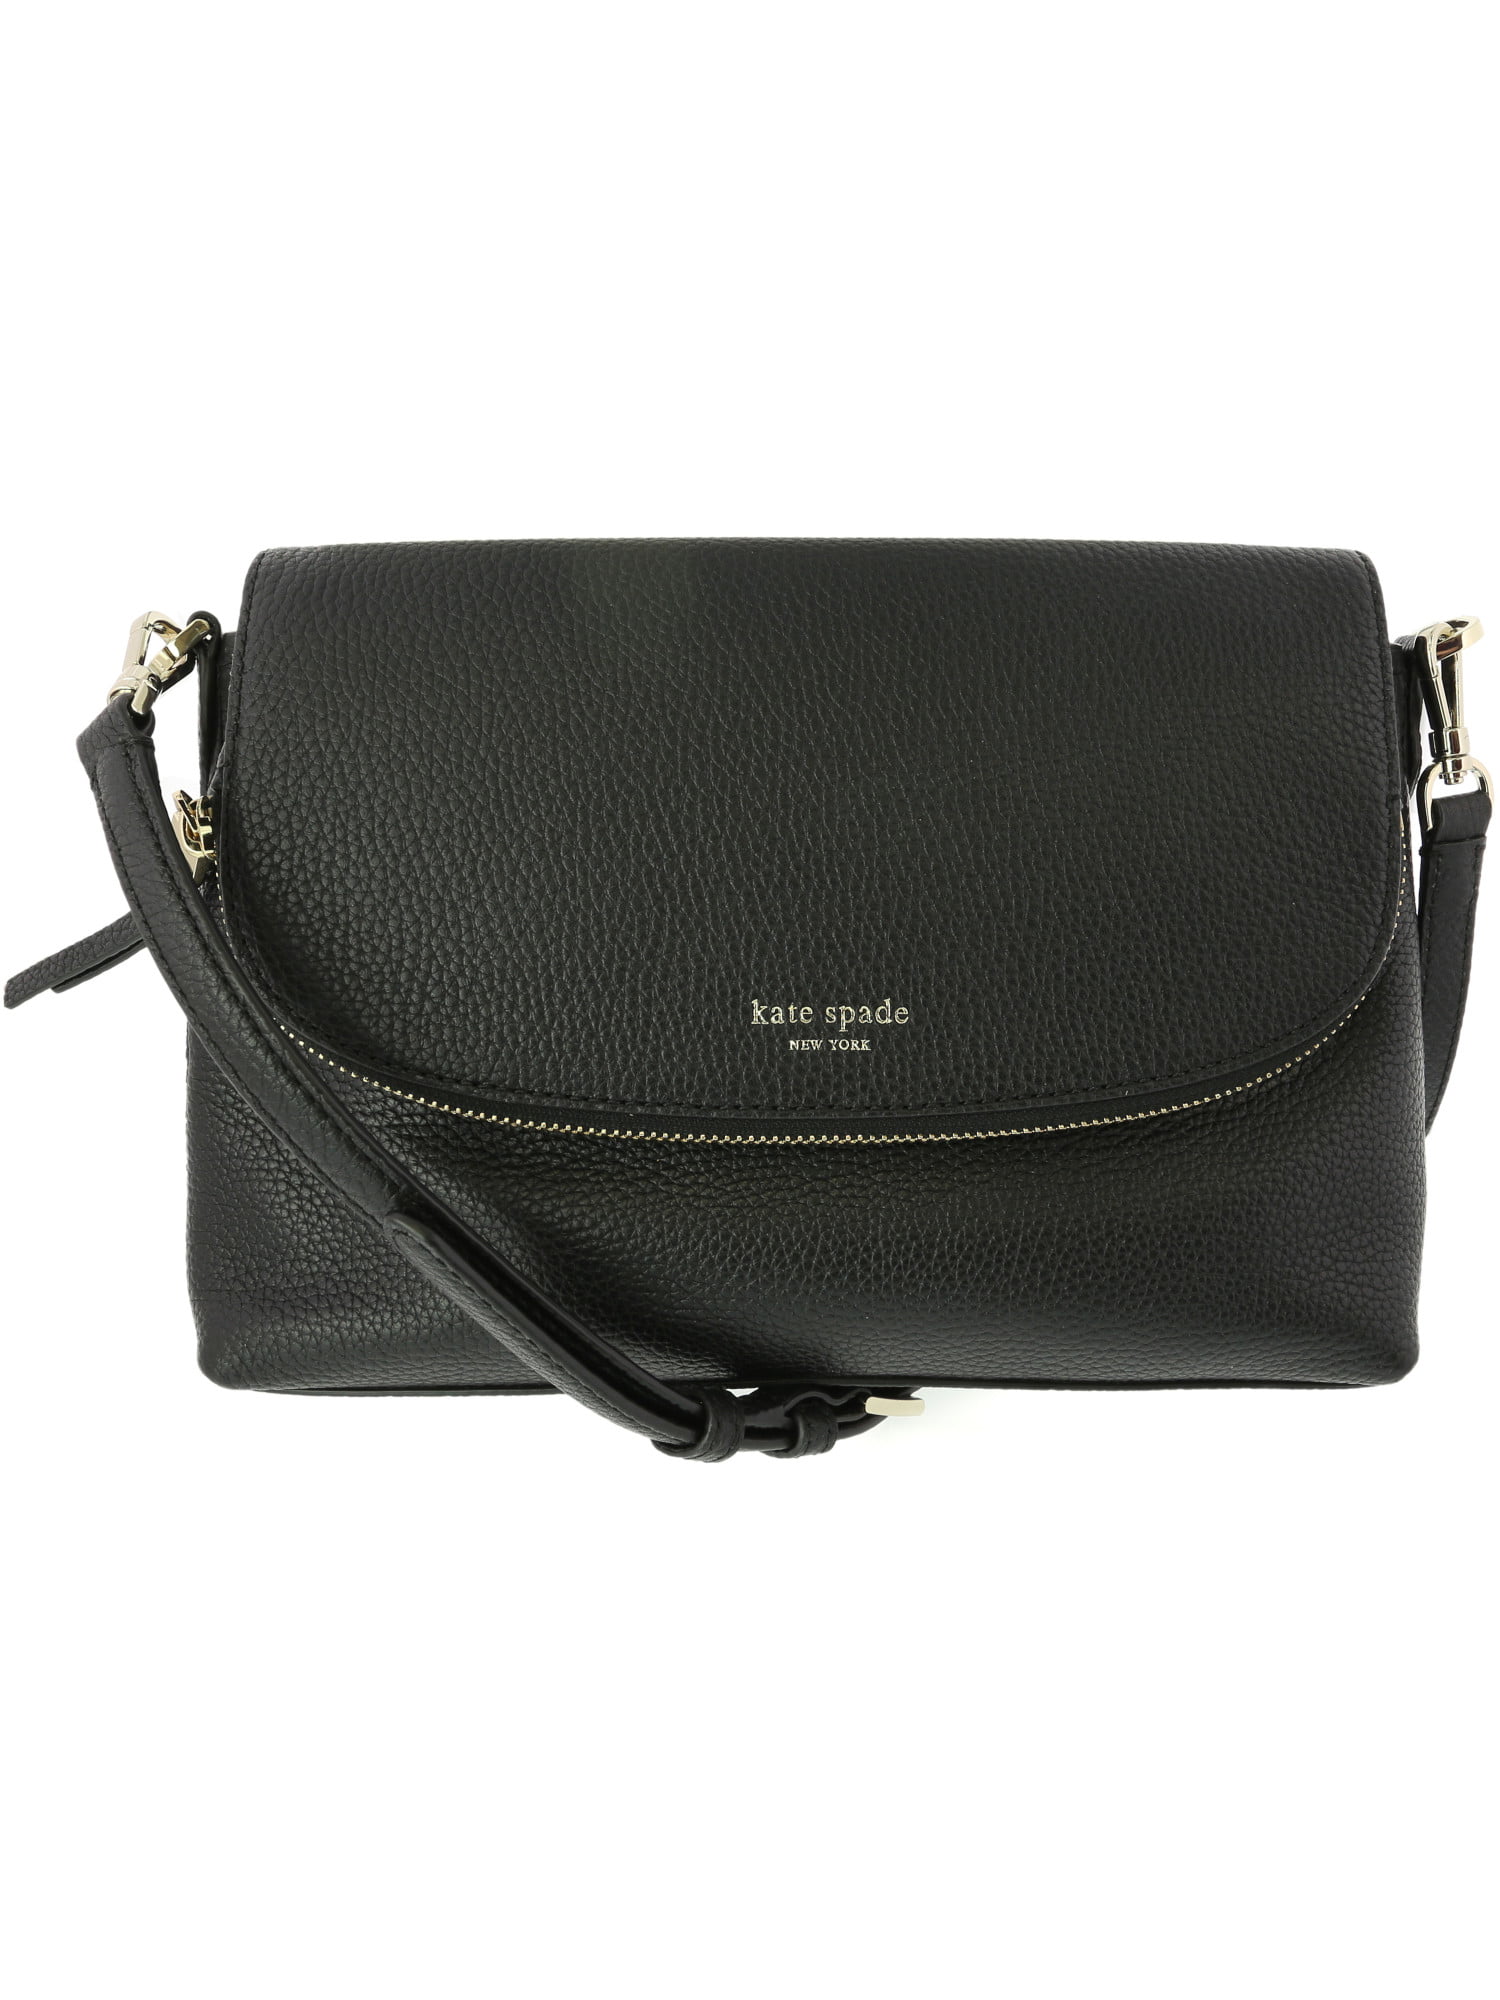 Kate Spade New York - Kate Spade Women's Large Polly Leather Crossbody